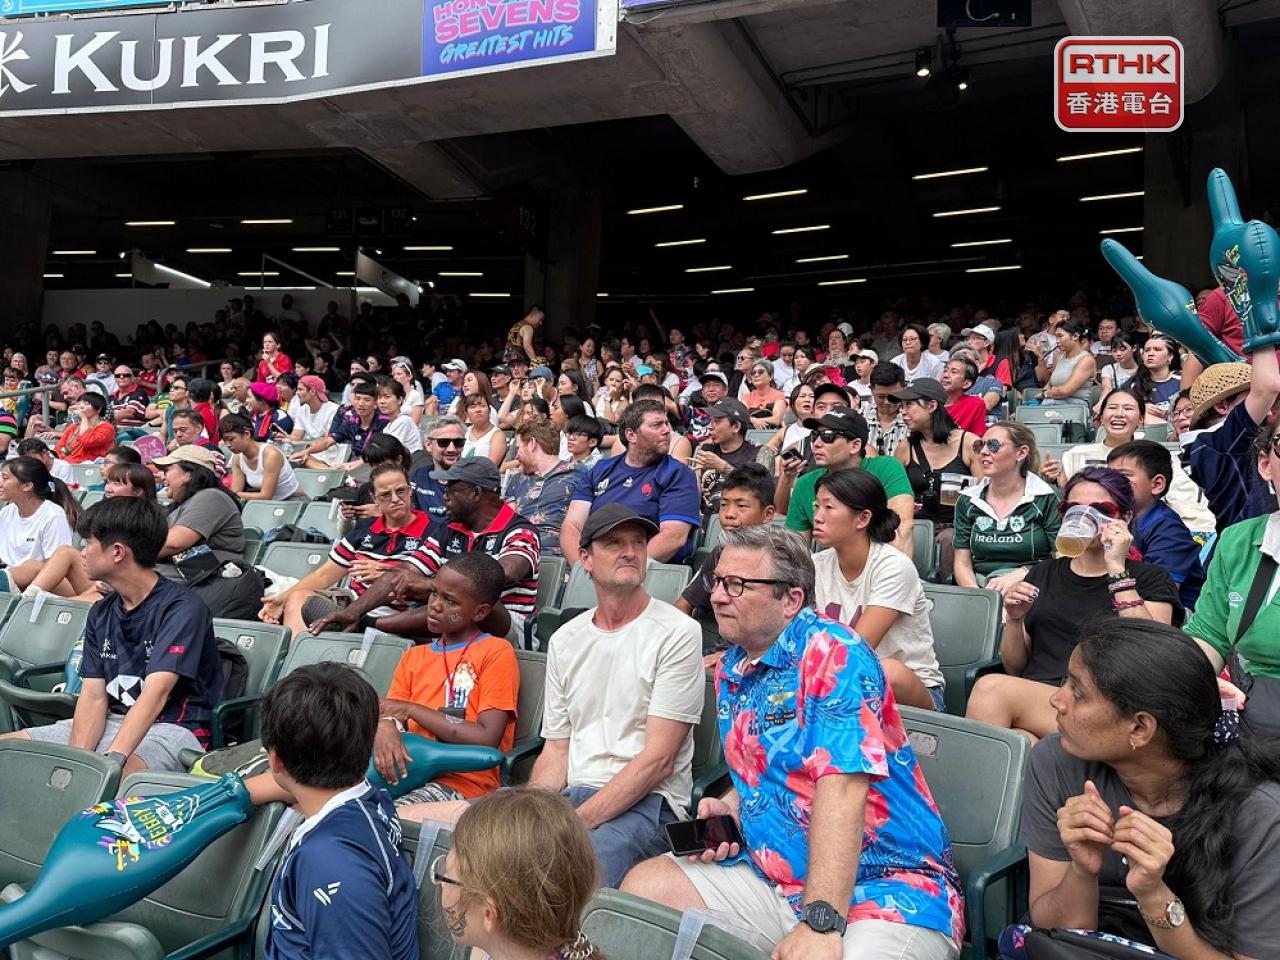 Sevens fans' farewell: We'll miss this special place